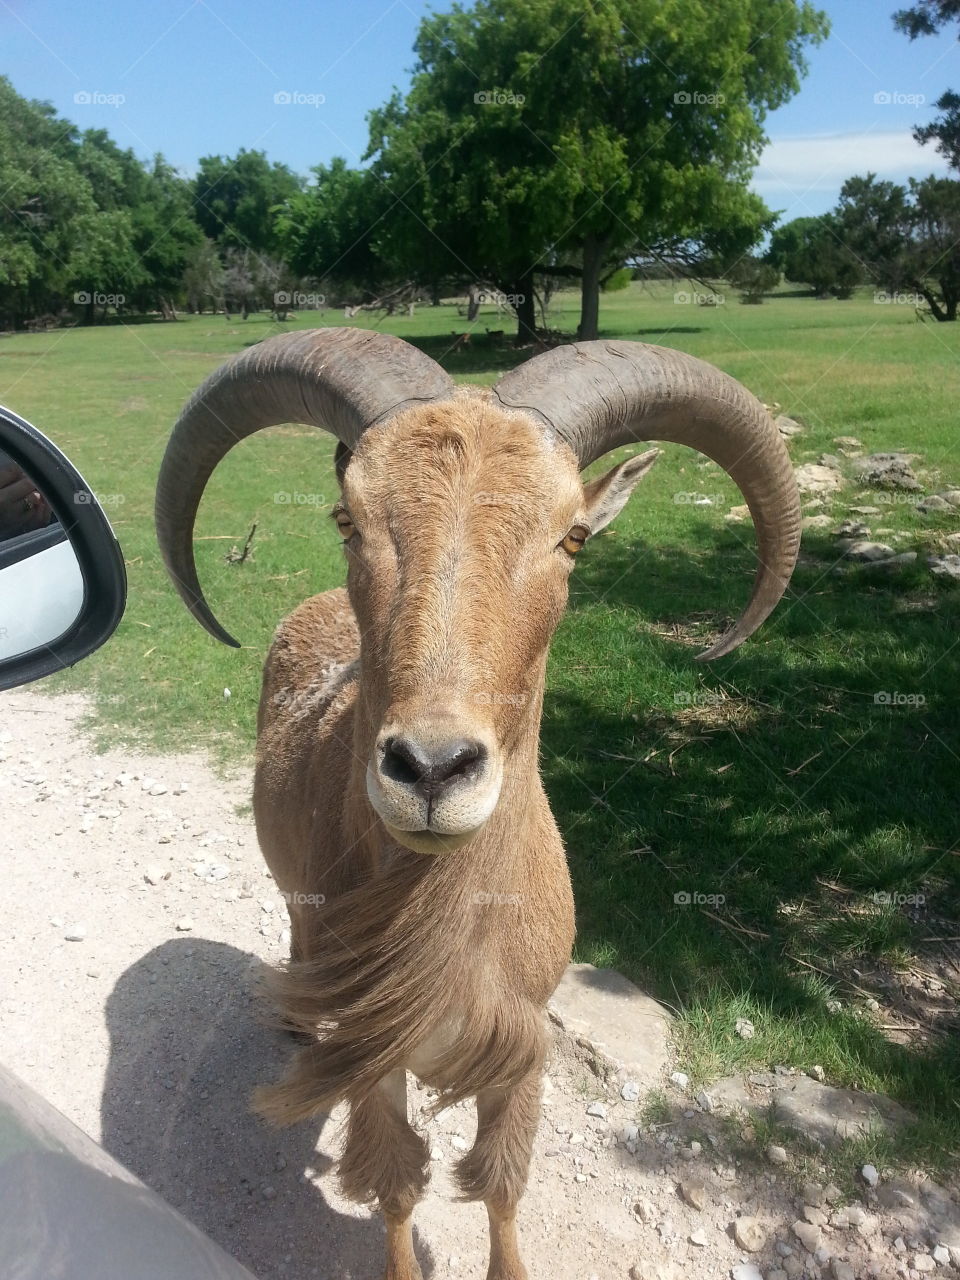 Ram. I went to the Topset zoo in Texas with a friend. you drive through and feed the animals! awesome experience. .